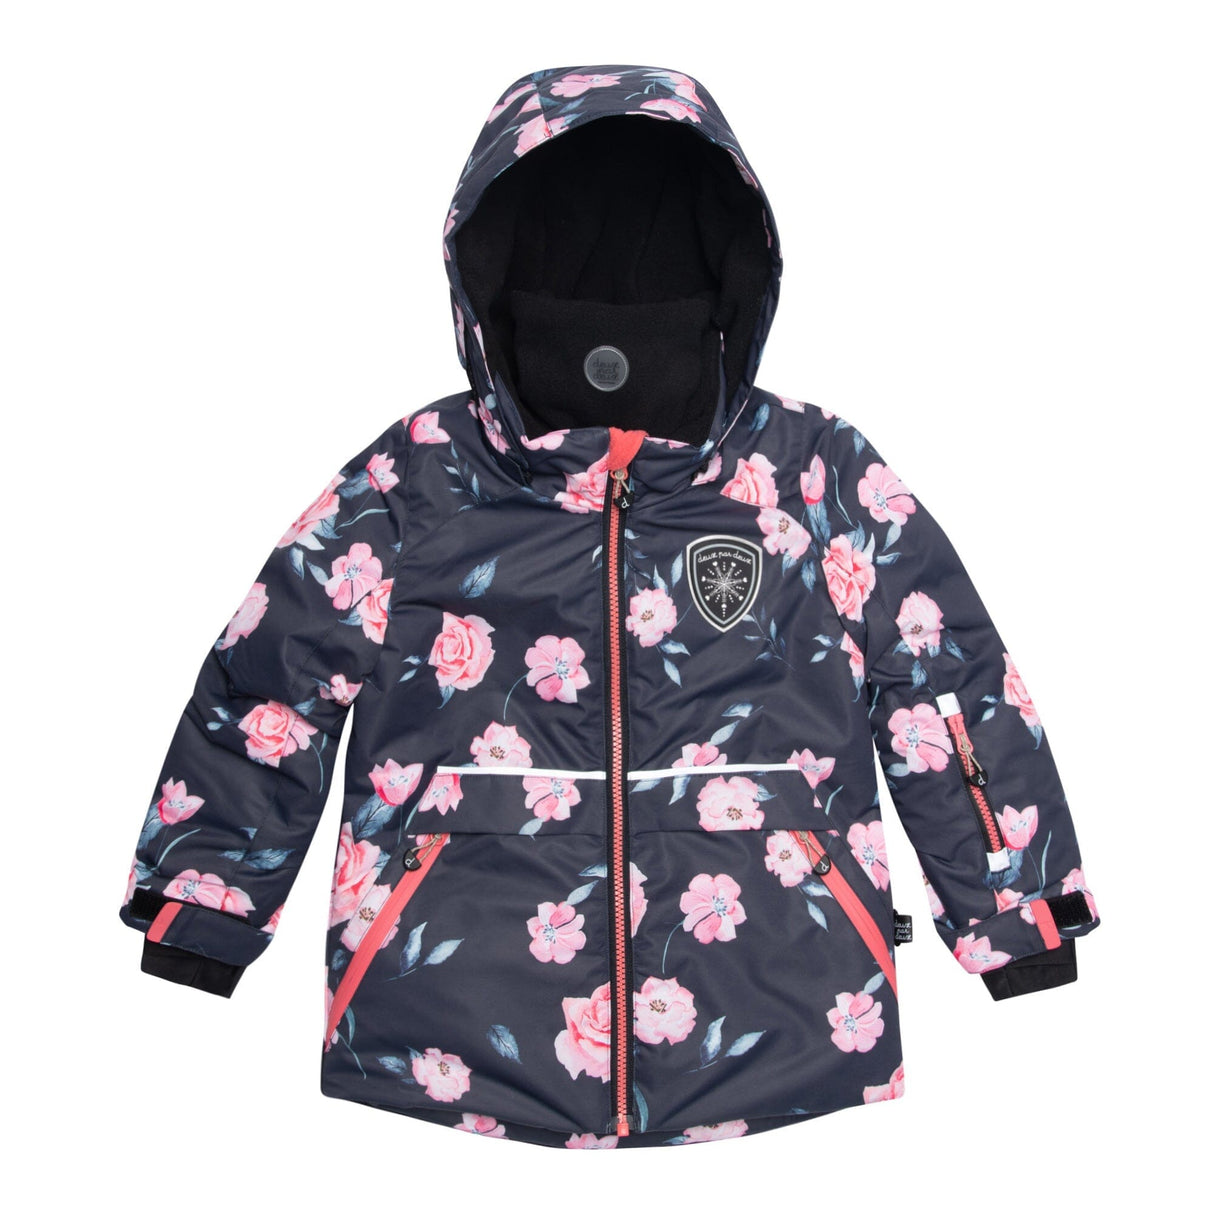 Two Piece Snowsuit Coral And Black With Rose Print-3